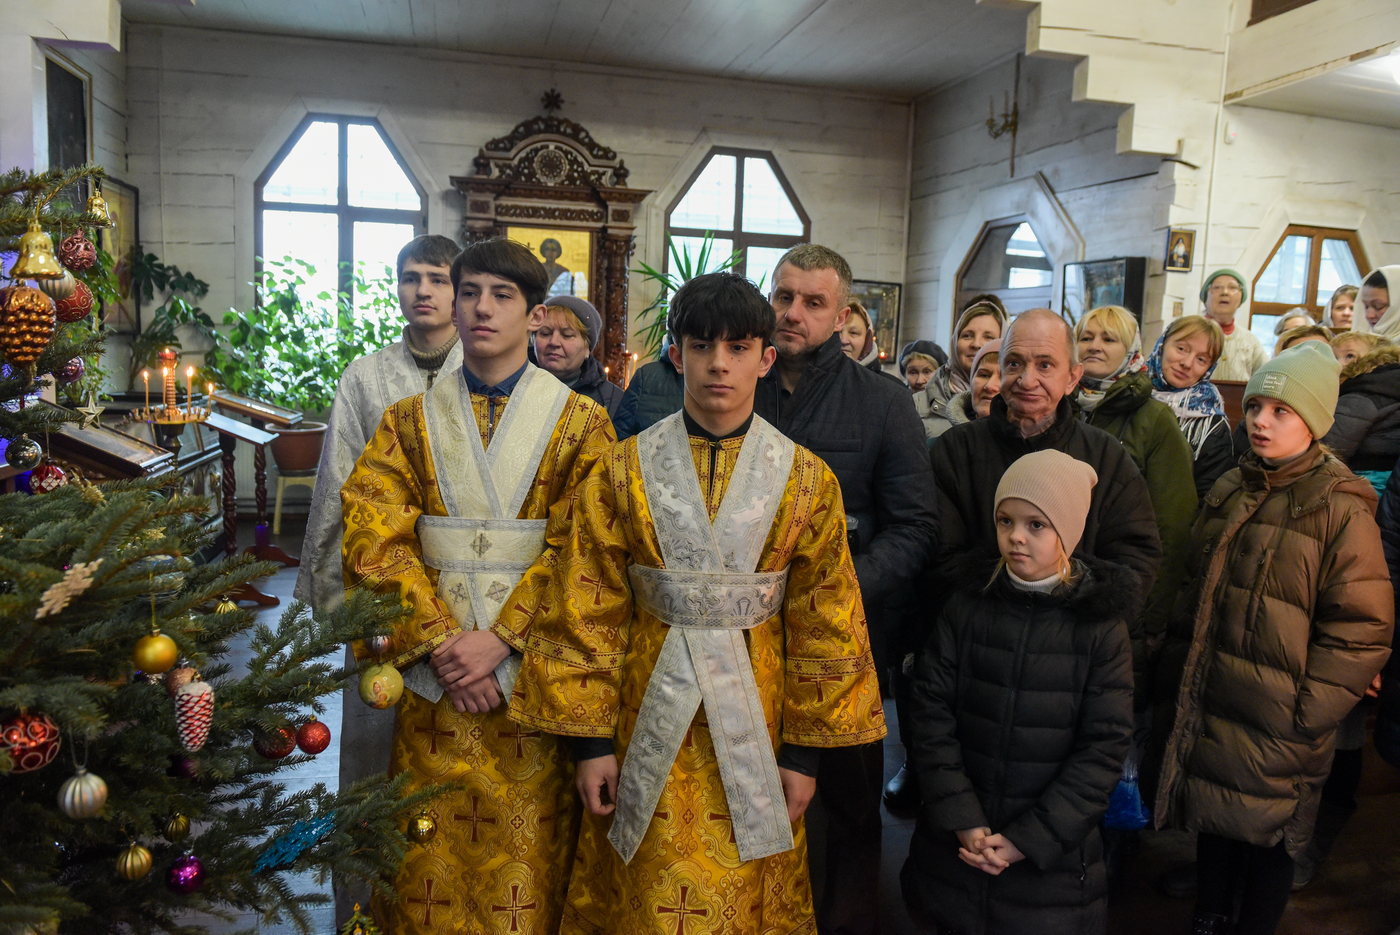 feast of the baptism of the lord at zhulyany 0201